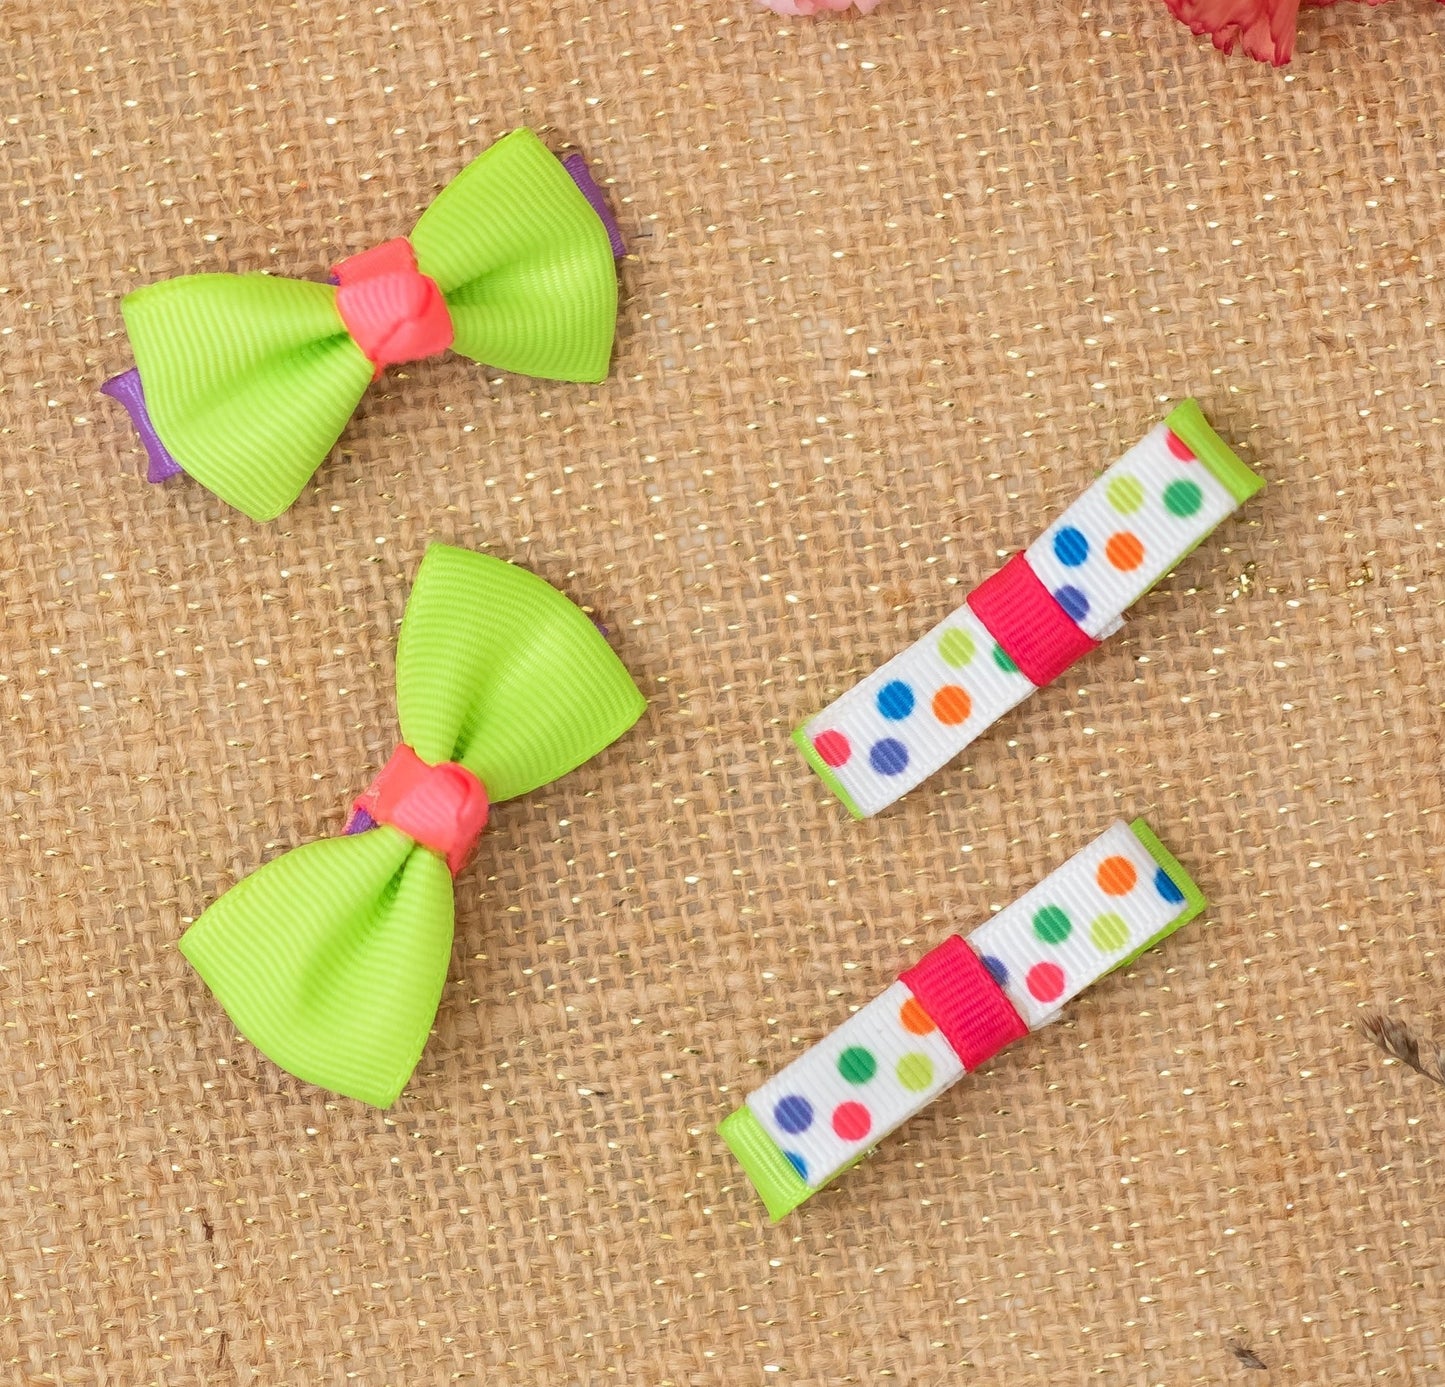 Pleasing polka dotted loopy bow on alligator clips along with pair of  pretty bow on alligator clips -Green and White (Set of 2 pairs- 4 quantity)